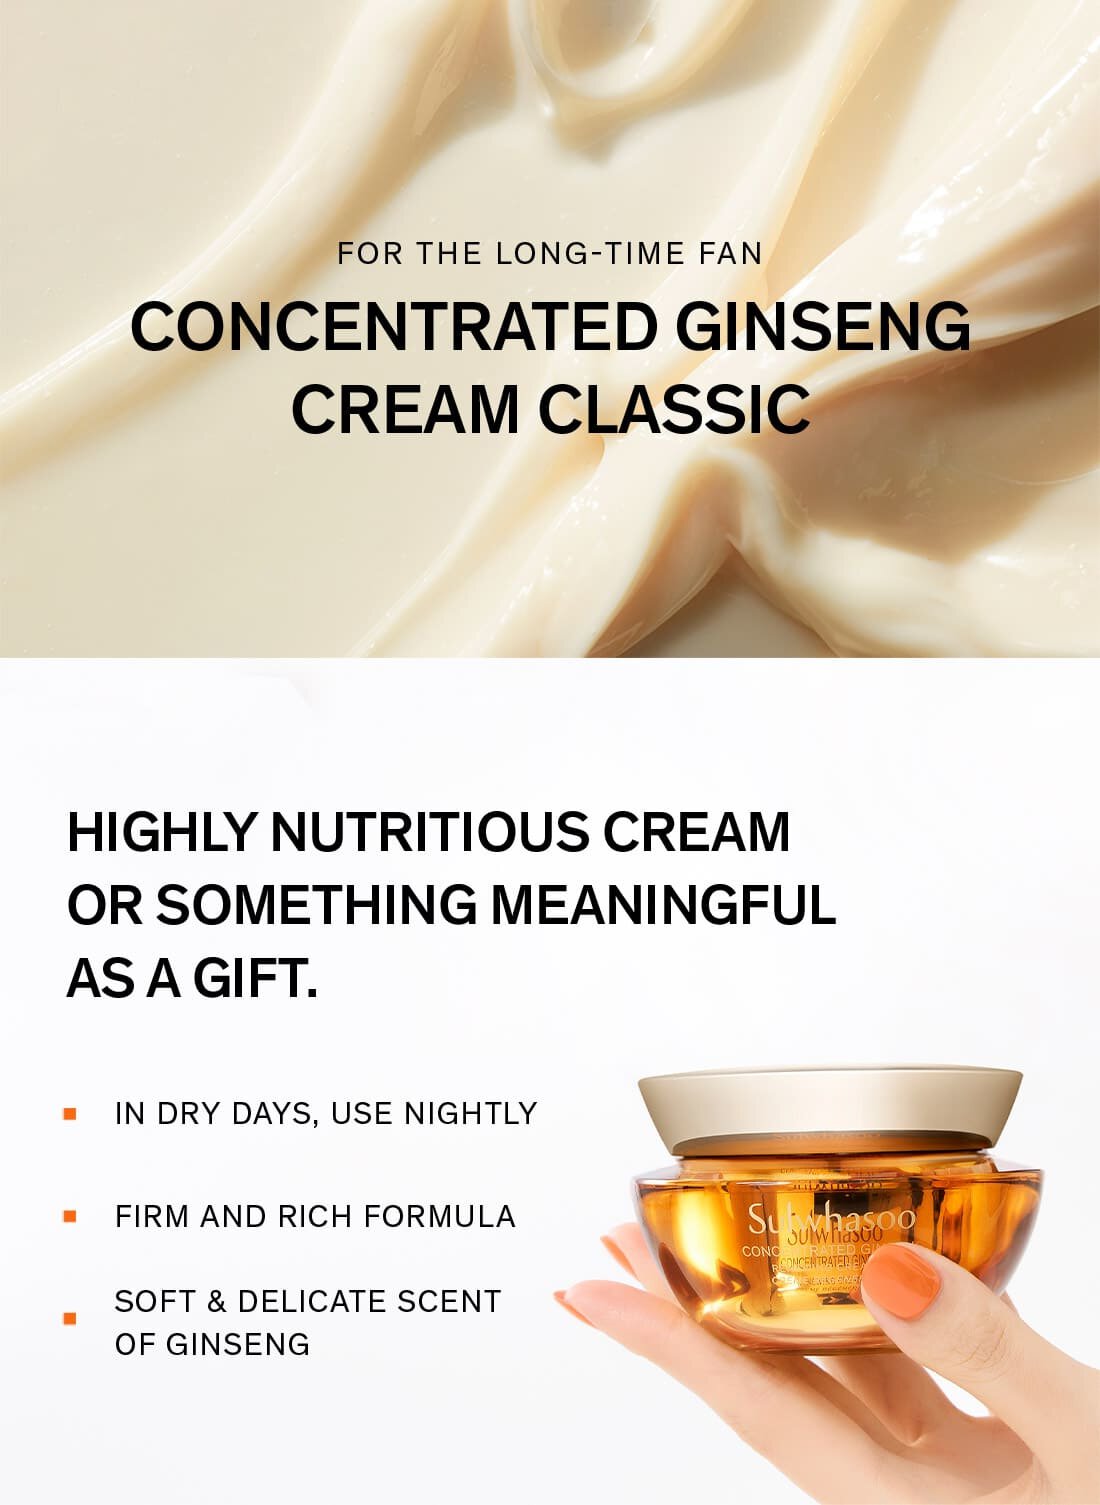 FOR THE LONG-TIME FAN CONCENTRATED GINSENG CREAM classic/HIGHLY NUTRITIOUS CREAM OR SOMETHING MEANINGFUL AS A GIFT. IN DRY DAYS, USE NIGHTLY/FIRM AND RICH FORMULA/SOFT & DELICATE SCENT OF GINSENG